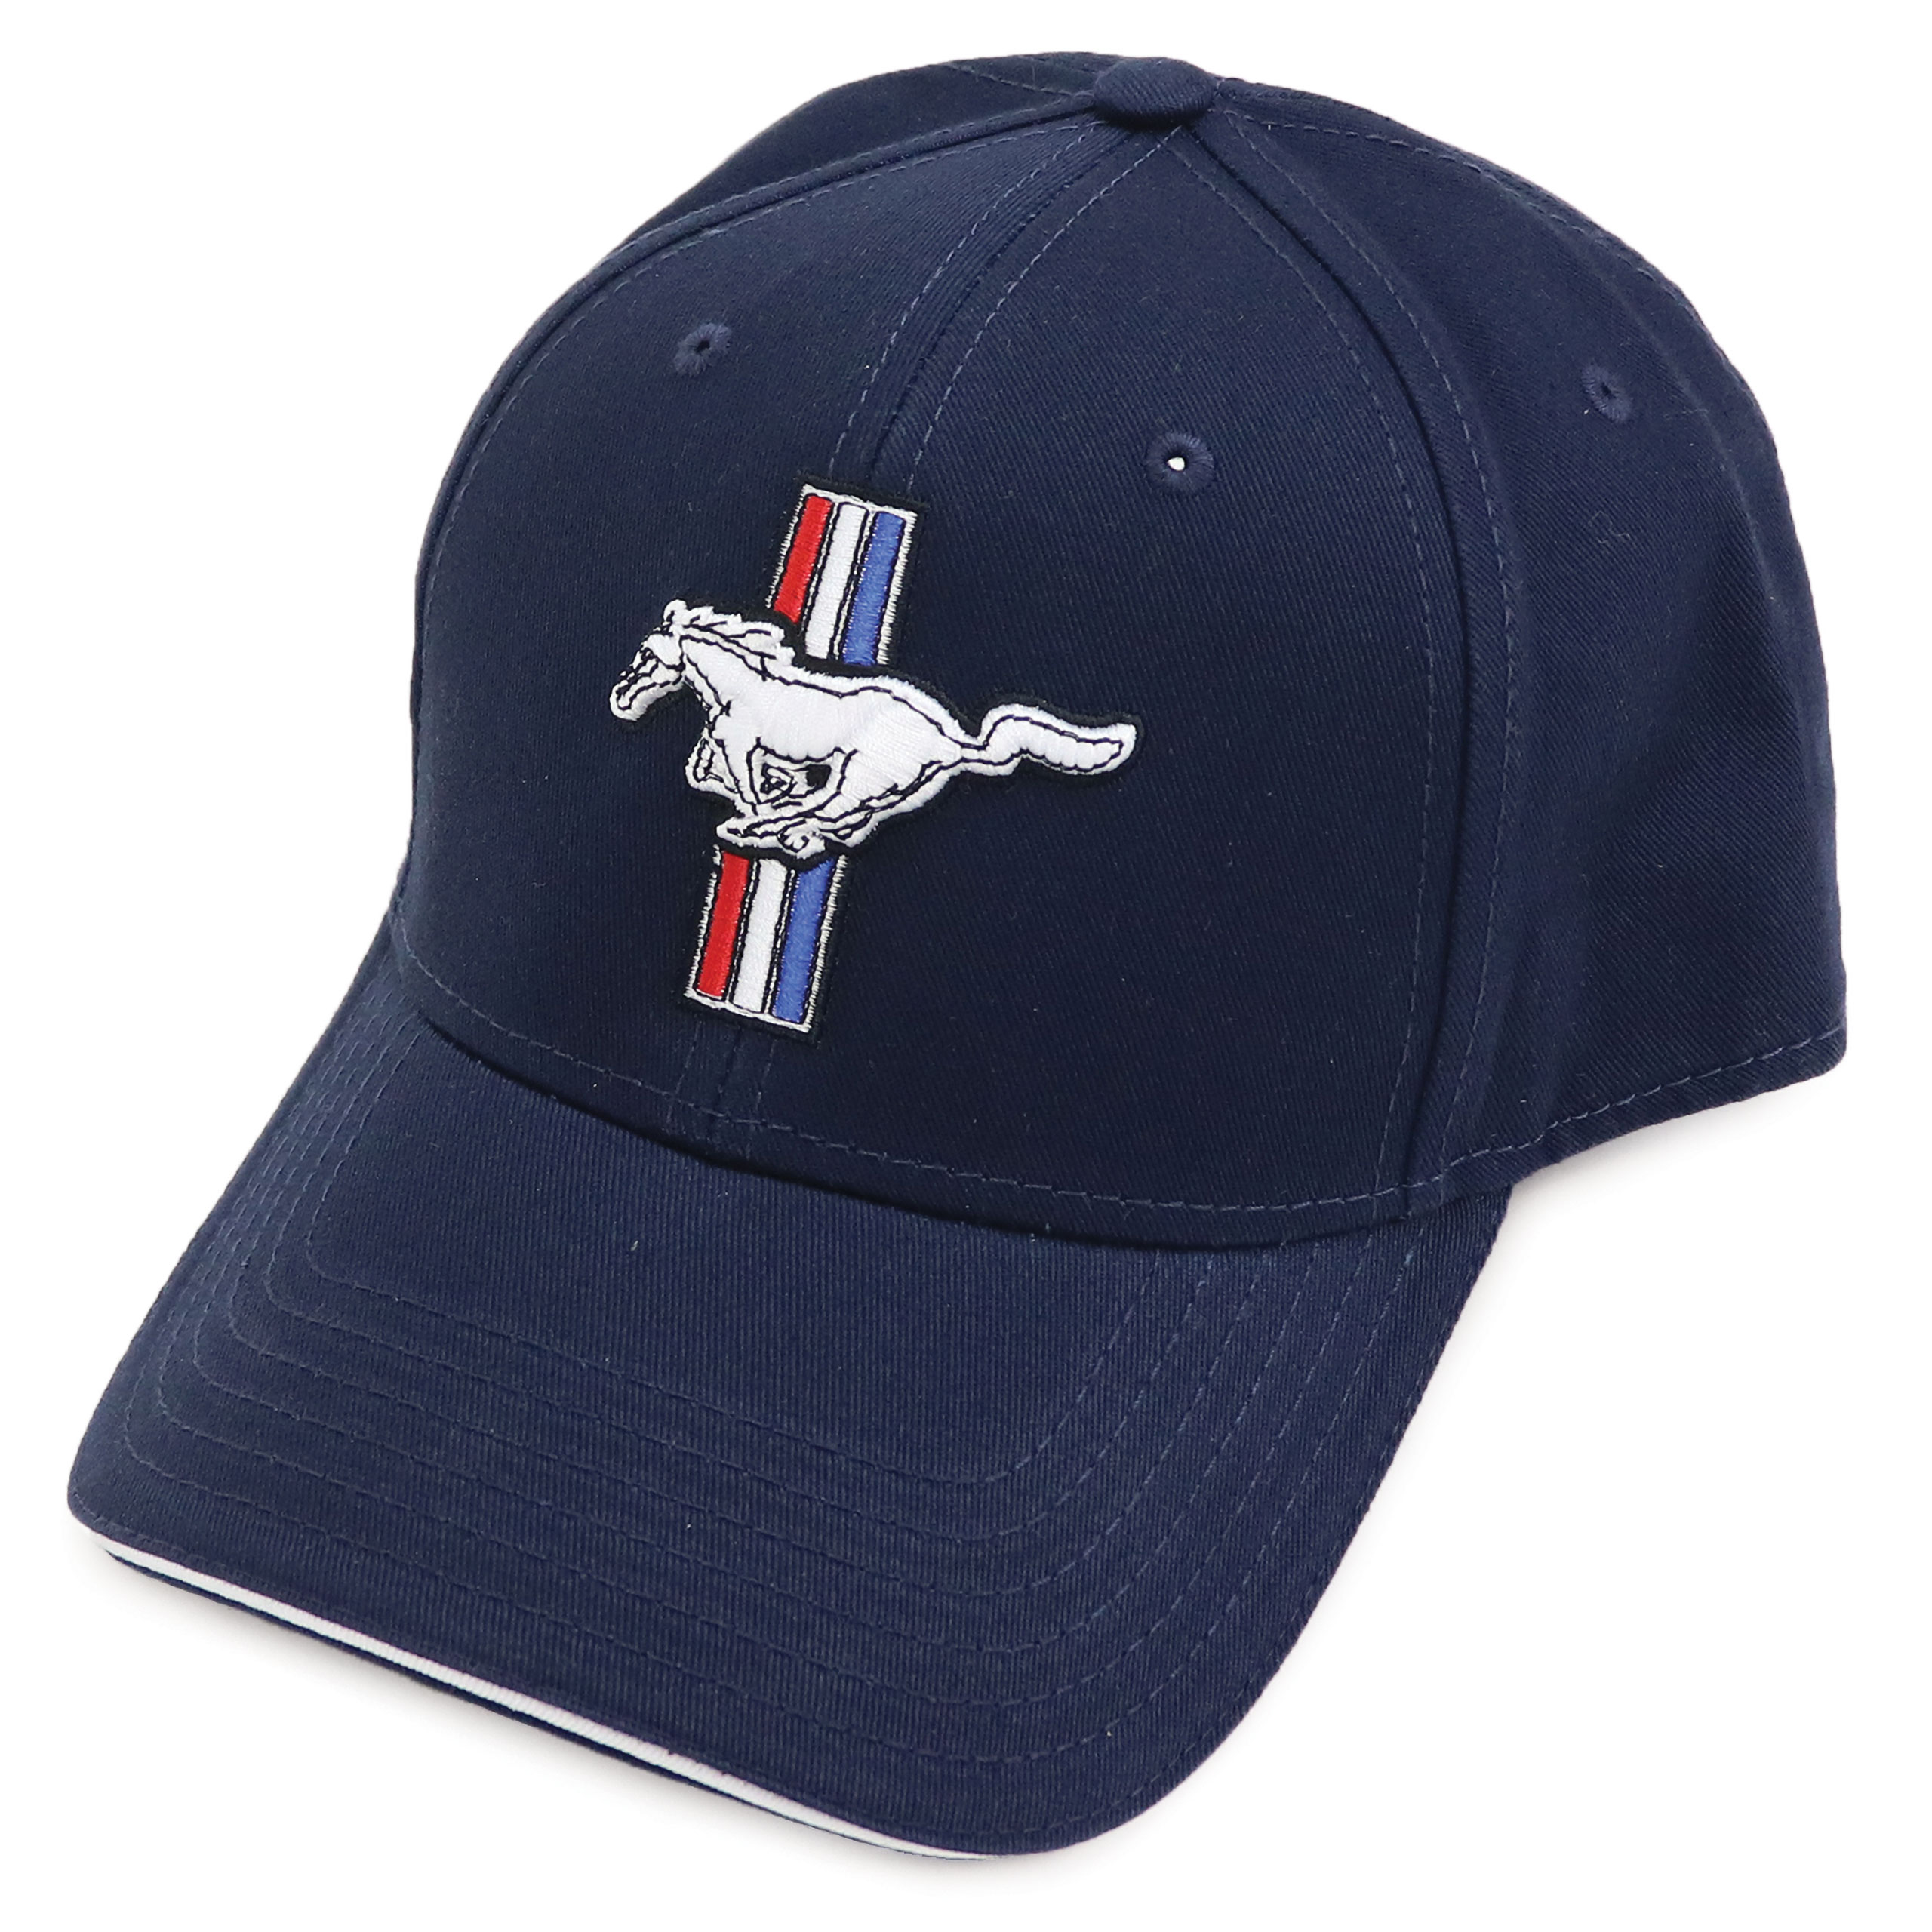 of Mustang Logo Mustang - Cotton America - 1964-2021 W/Pony Ford Auto Accessories Cap Twill Blue